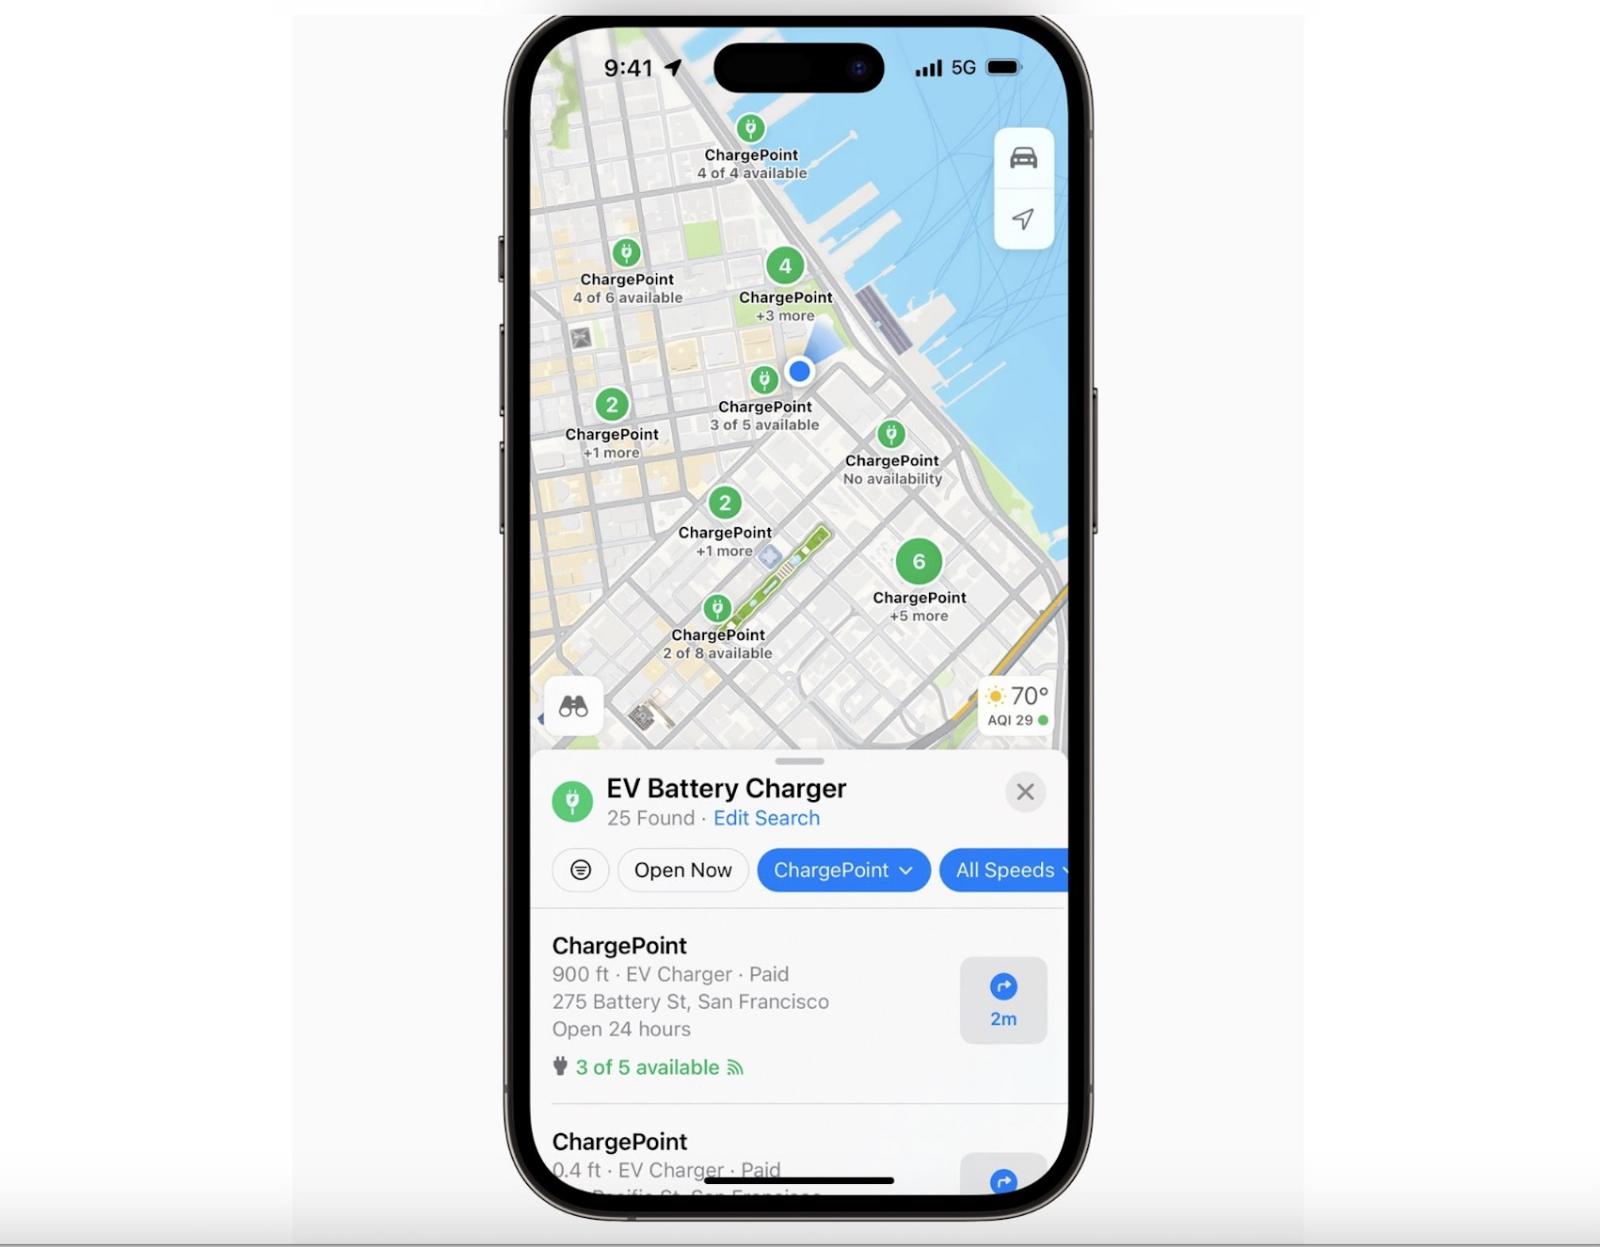 Need to charge your EV? Apple Maps will show open spots near you